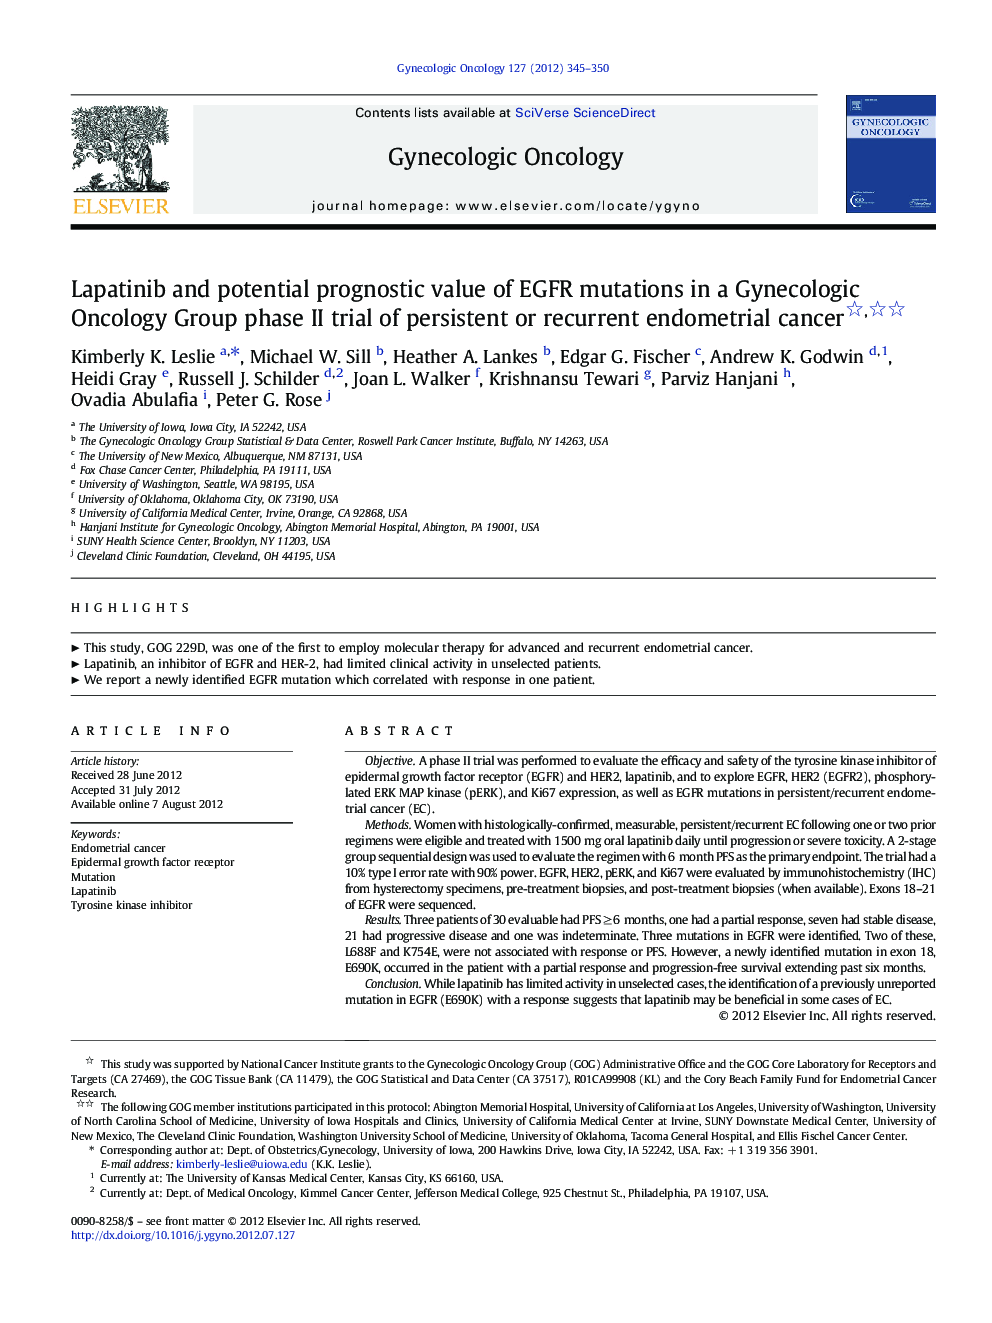 Lapatinib and potential prognostic value of EGFR mutations in a Gynecologic Oncology Group phase II trial of persistent or recurrent endometrial cancer 